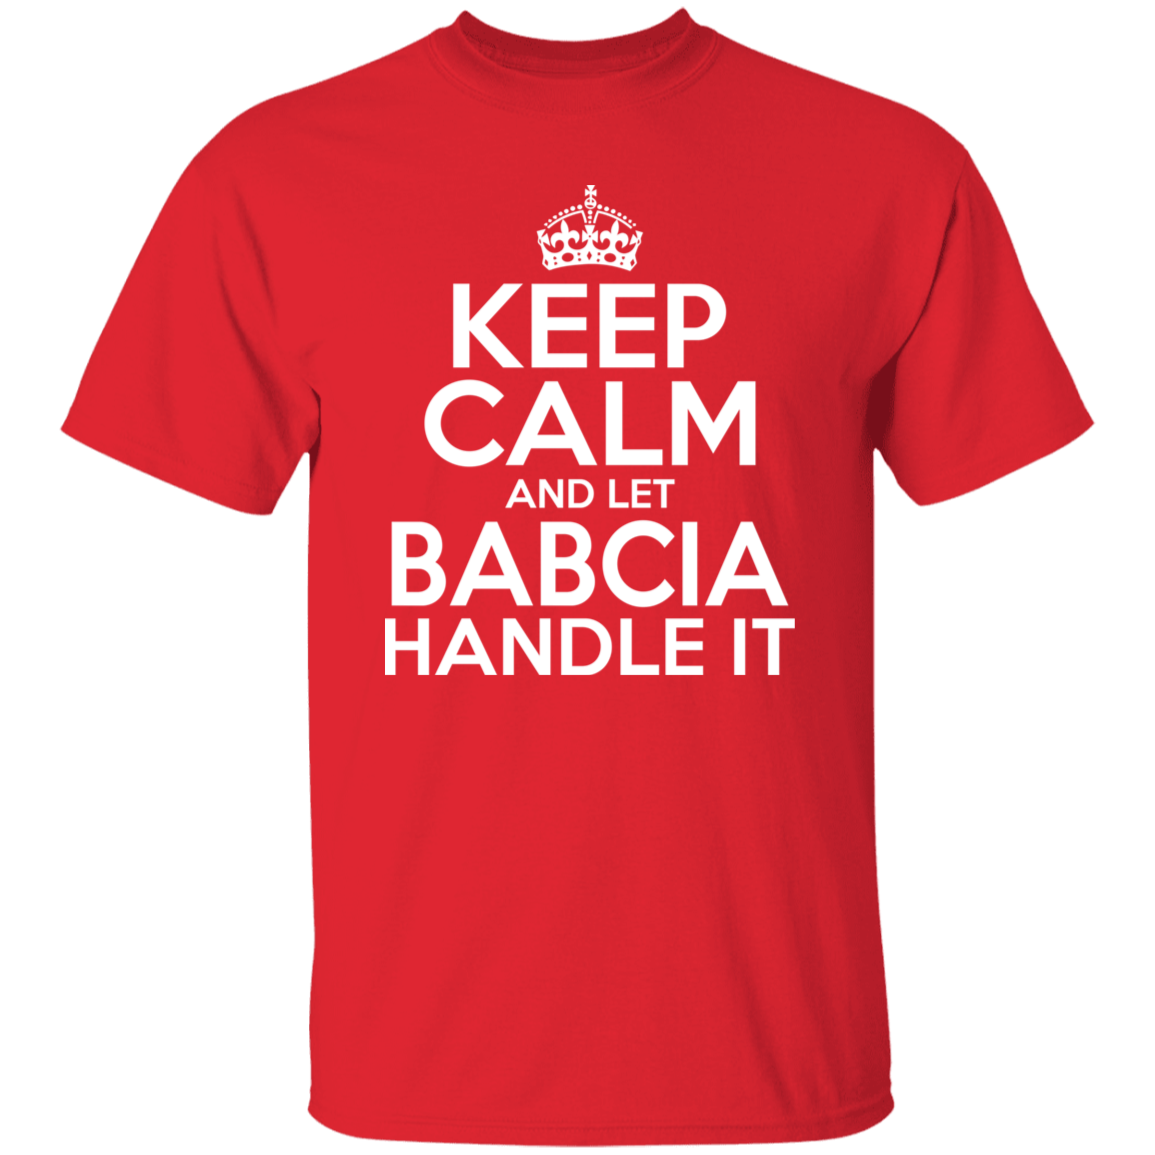 Keep Calm And Let Babcia Handle It Apparel CustomCat G500 5.3 oz. T-Shirt Red S